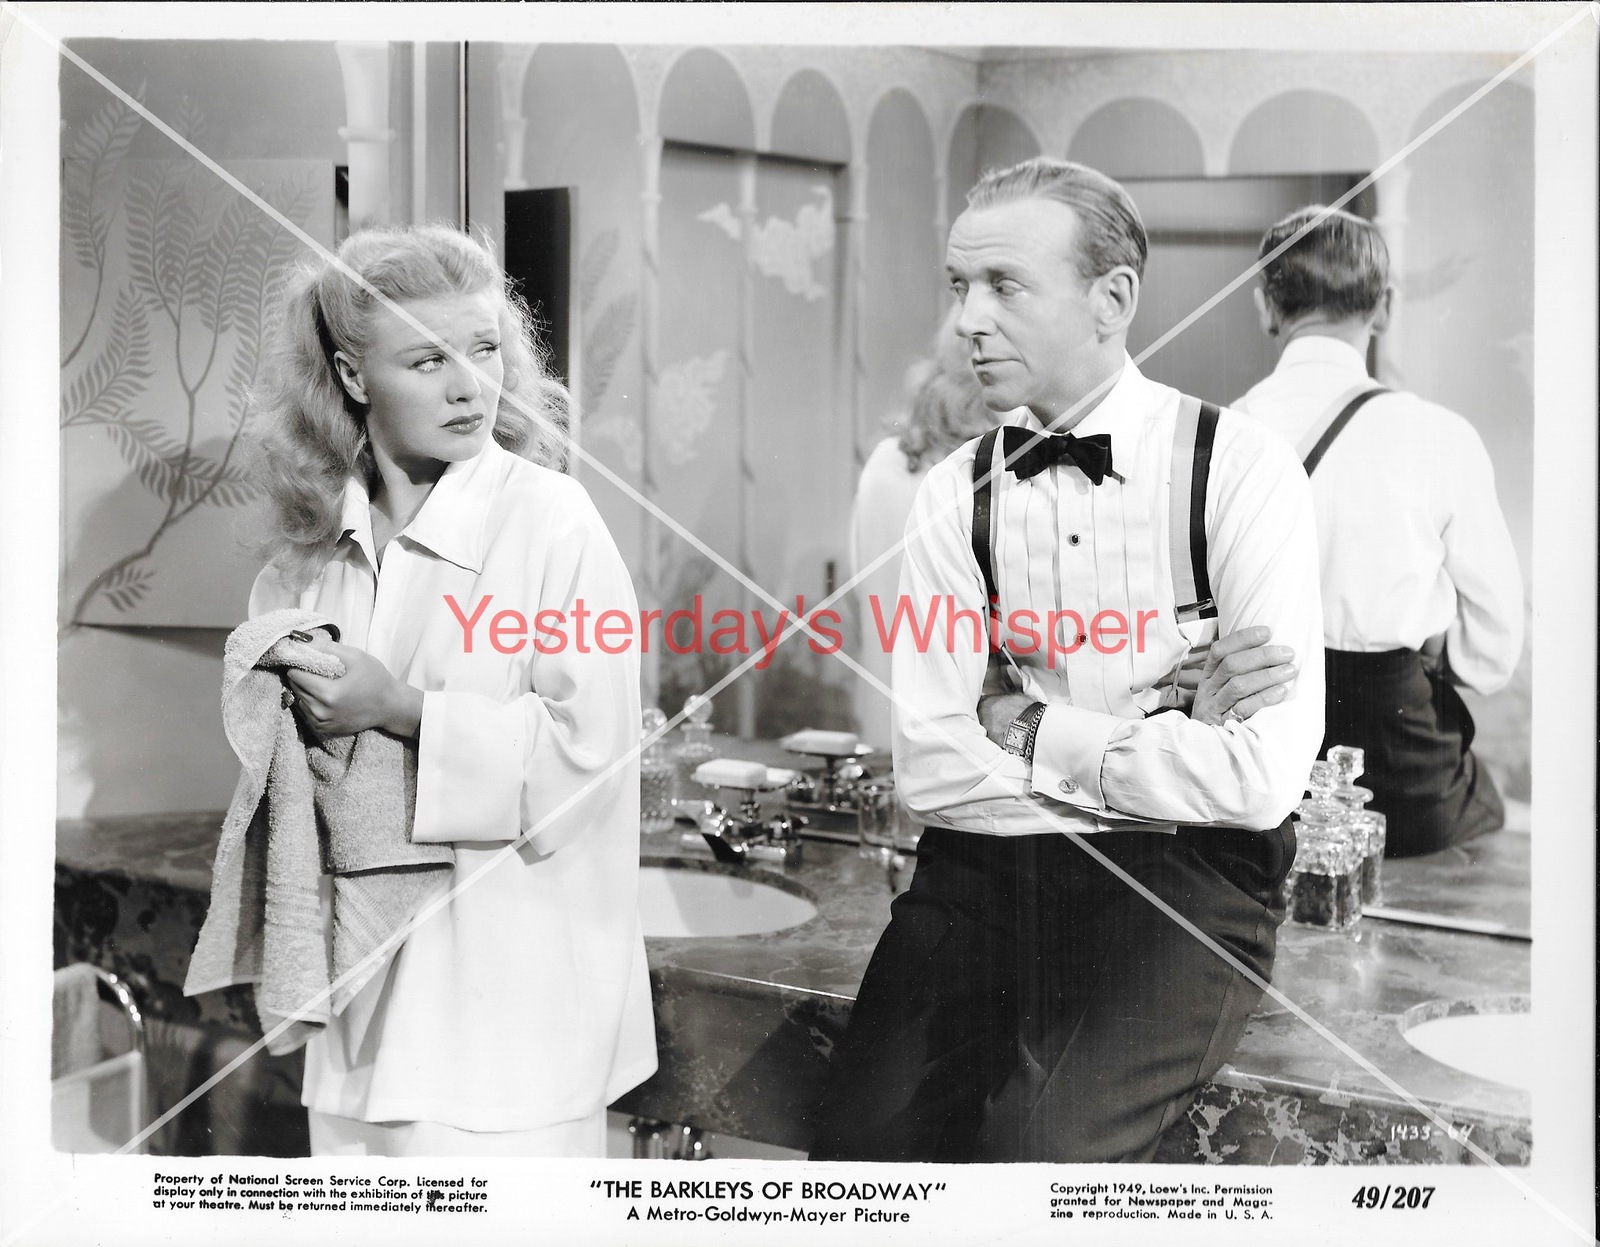 Fred Astaire Ginger Rogers Bathroom Original The Barkleys of Broadway Photo  - $19.99